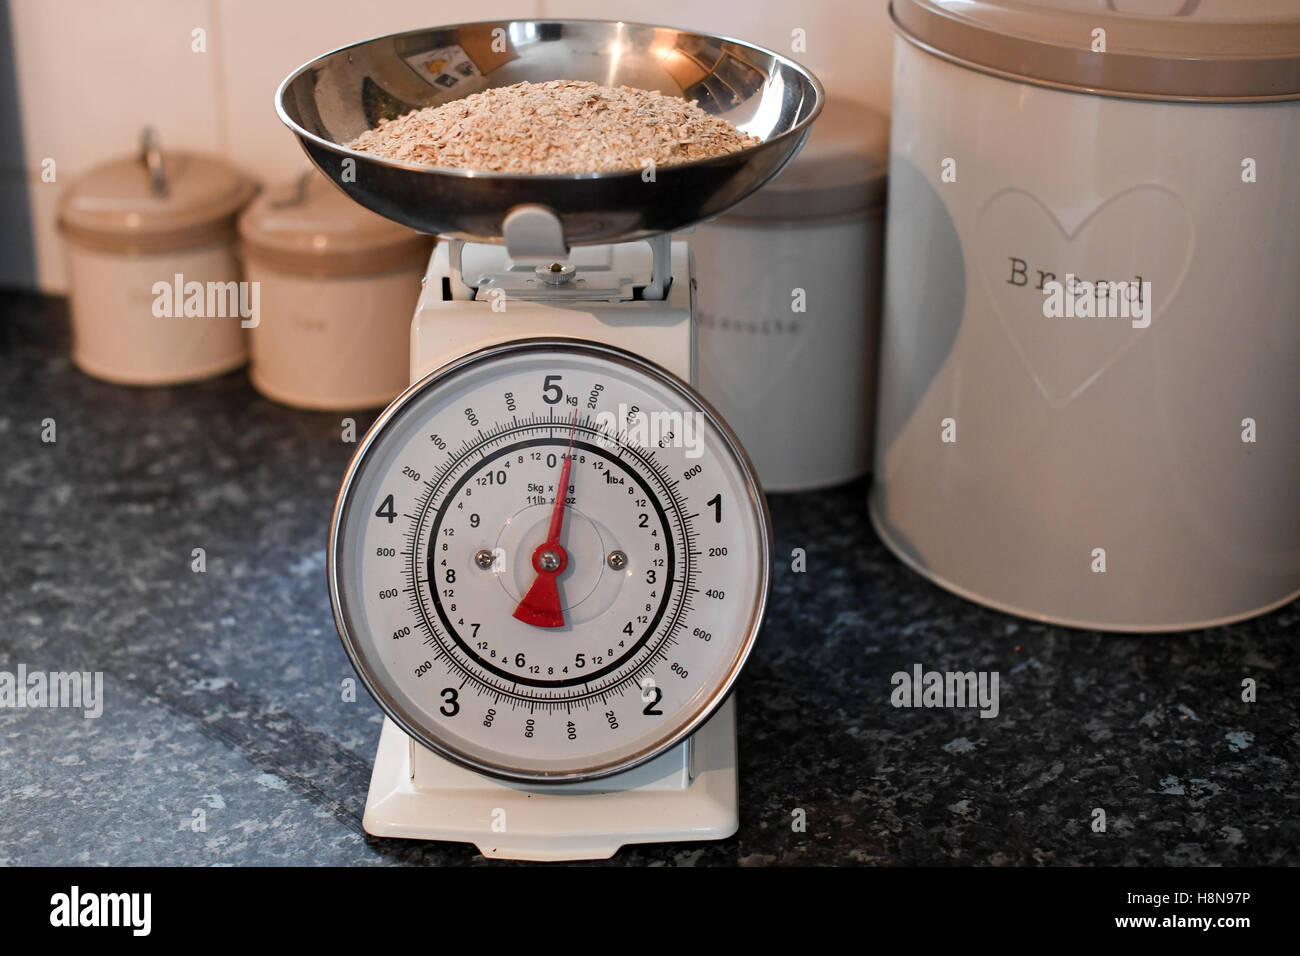 https://c8.alamy.com/comp/H8N97P/weighing-scales-in-a-kitchen-environment-with-porridge-oats-in-the-H8N97P.jpg